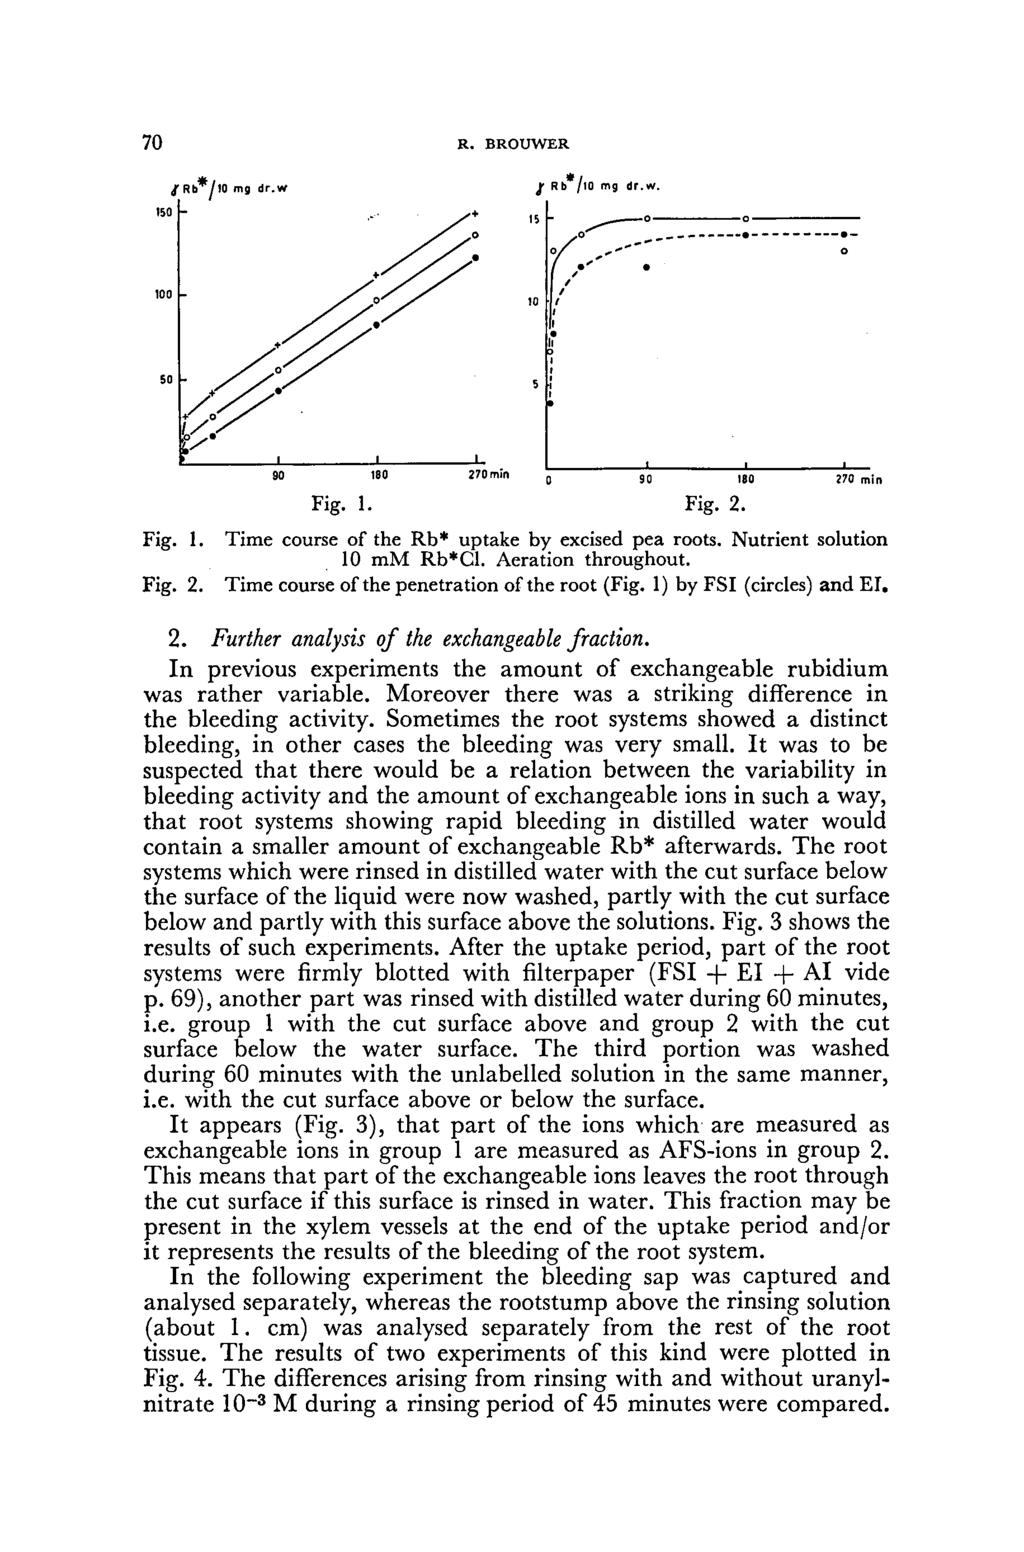 70 R. BROUWER Fig. 1. Fig. 2. Fig. 1. Time course of the Rb* uptake by excised pea roots. Nutrient solution 10 ram Rb*Cl. Aeration throughout. Fig. 2. Time course of the penetration ofthe root (Fig.